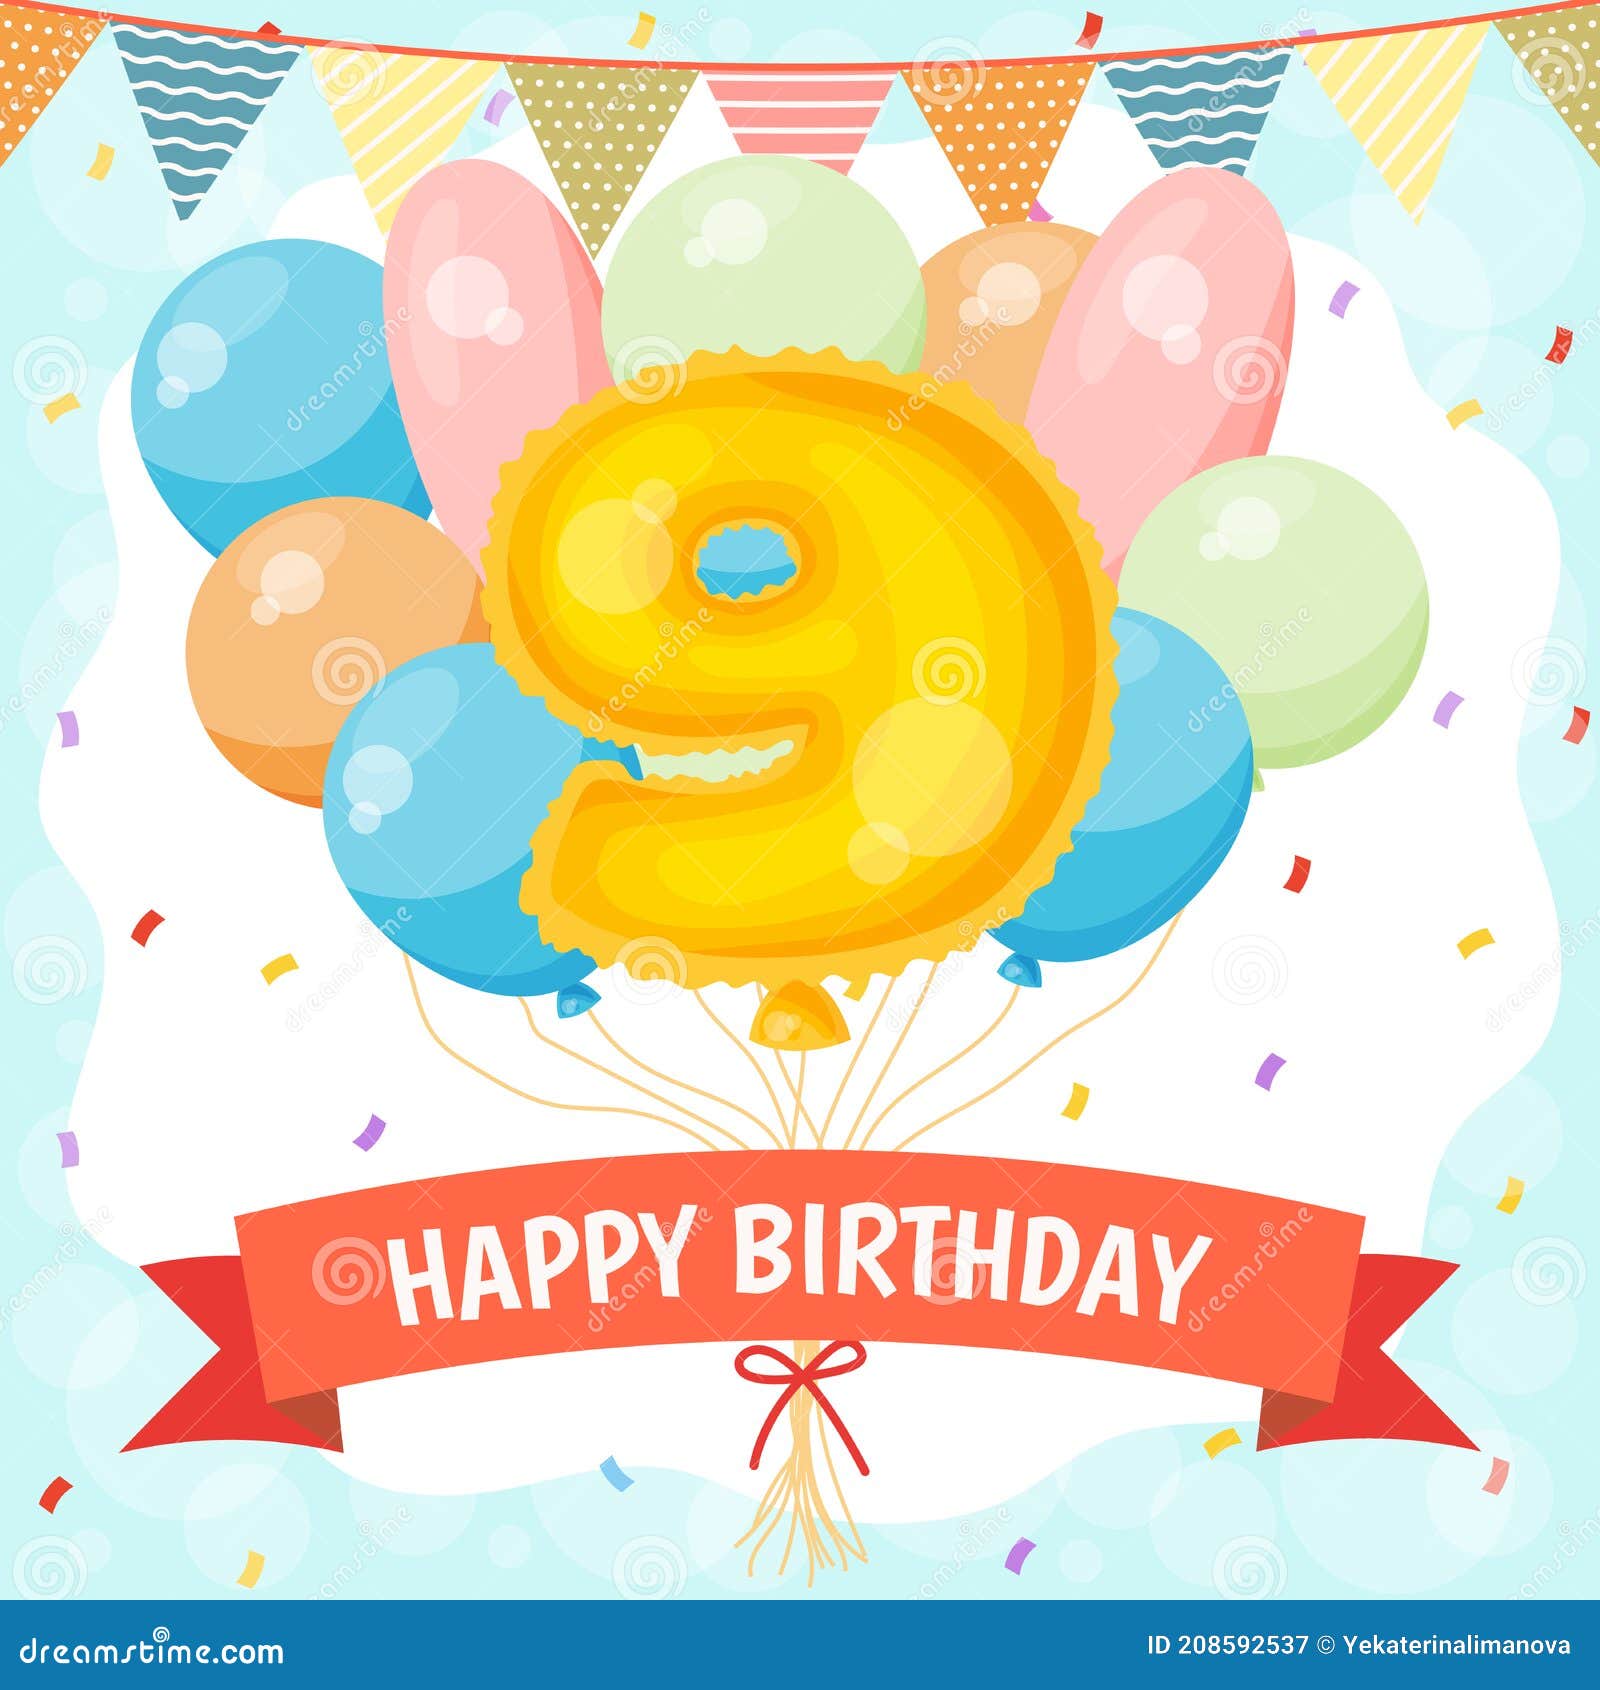 Happy Birthday Greeting Card with Big Foil Number Balloon Stock Vector ...